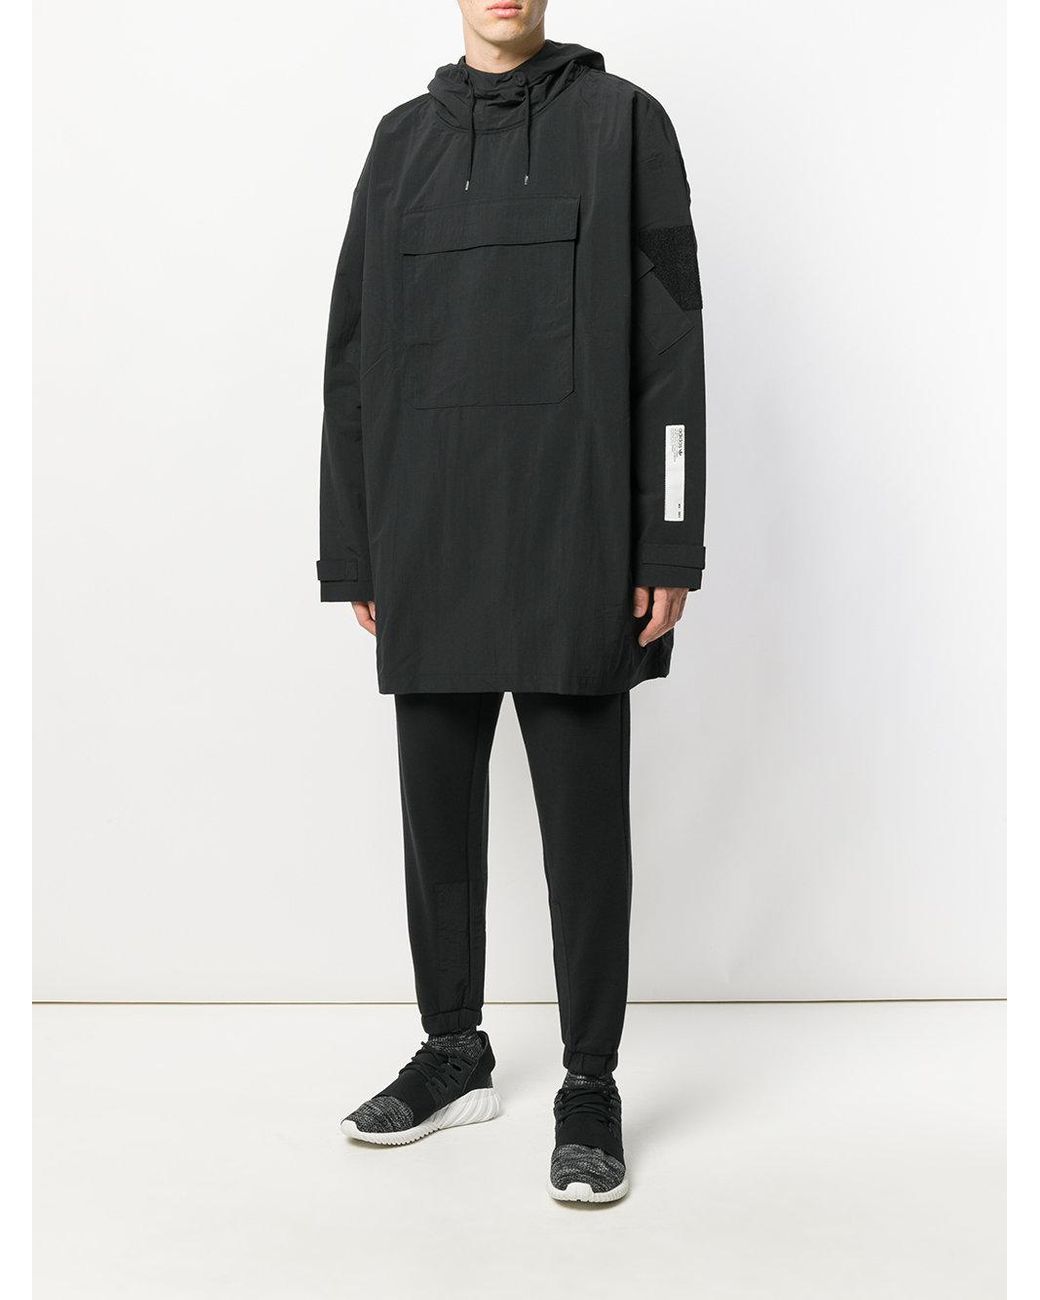 adidas Nmd Oversized Pullover Jacket in Black for Men | Lyst